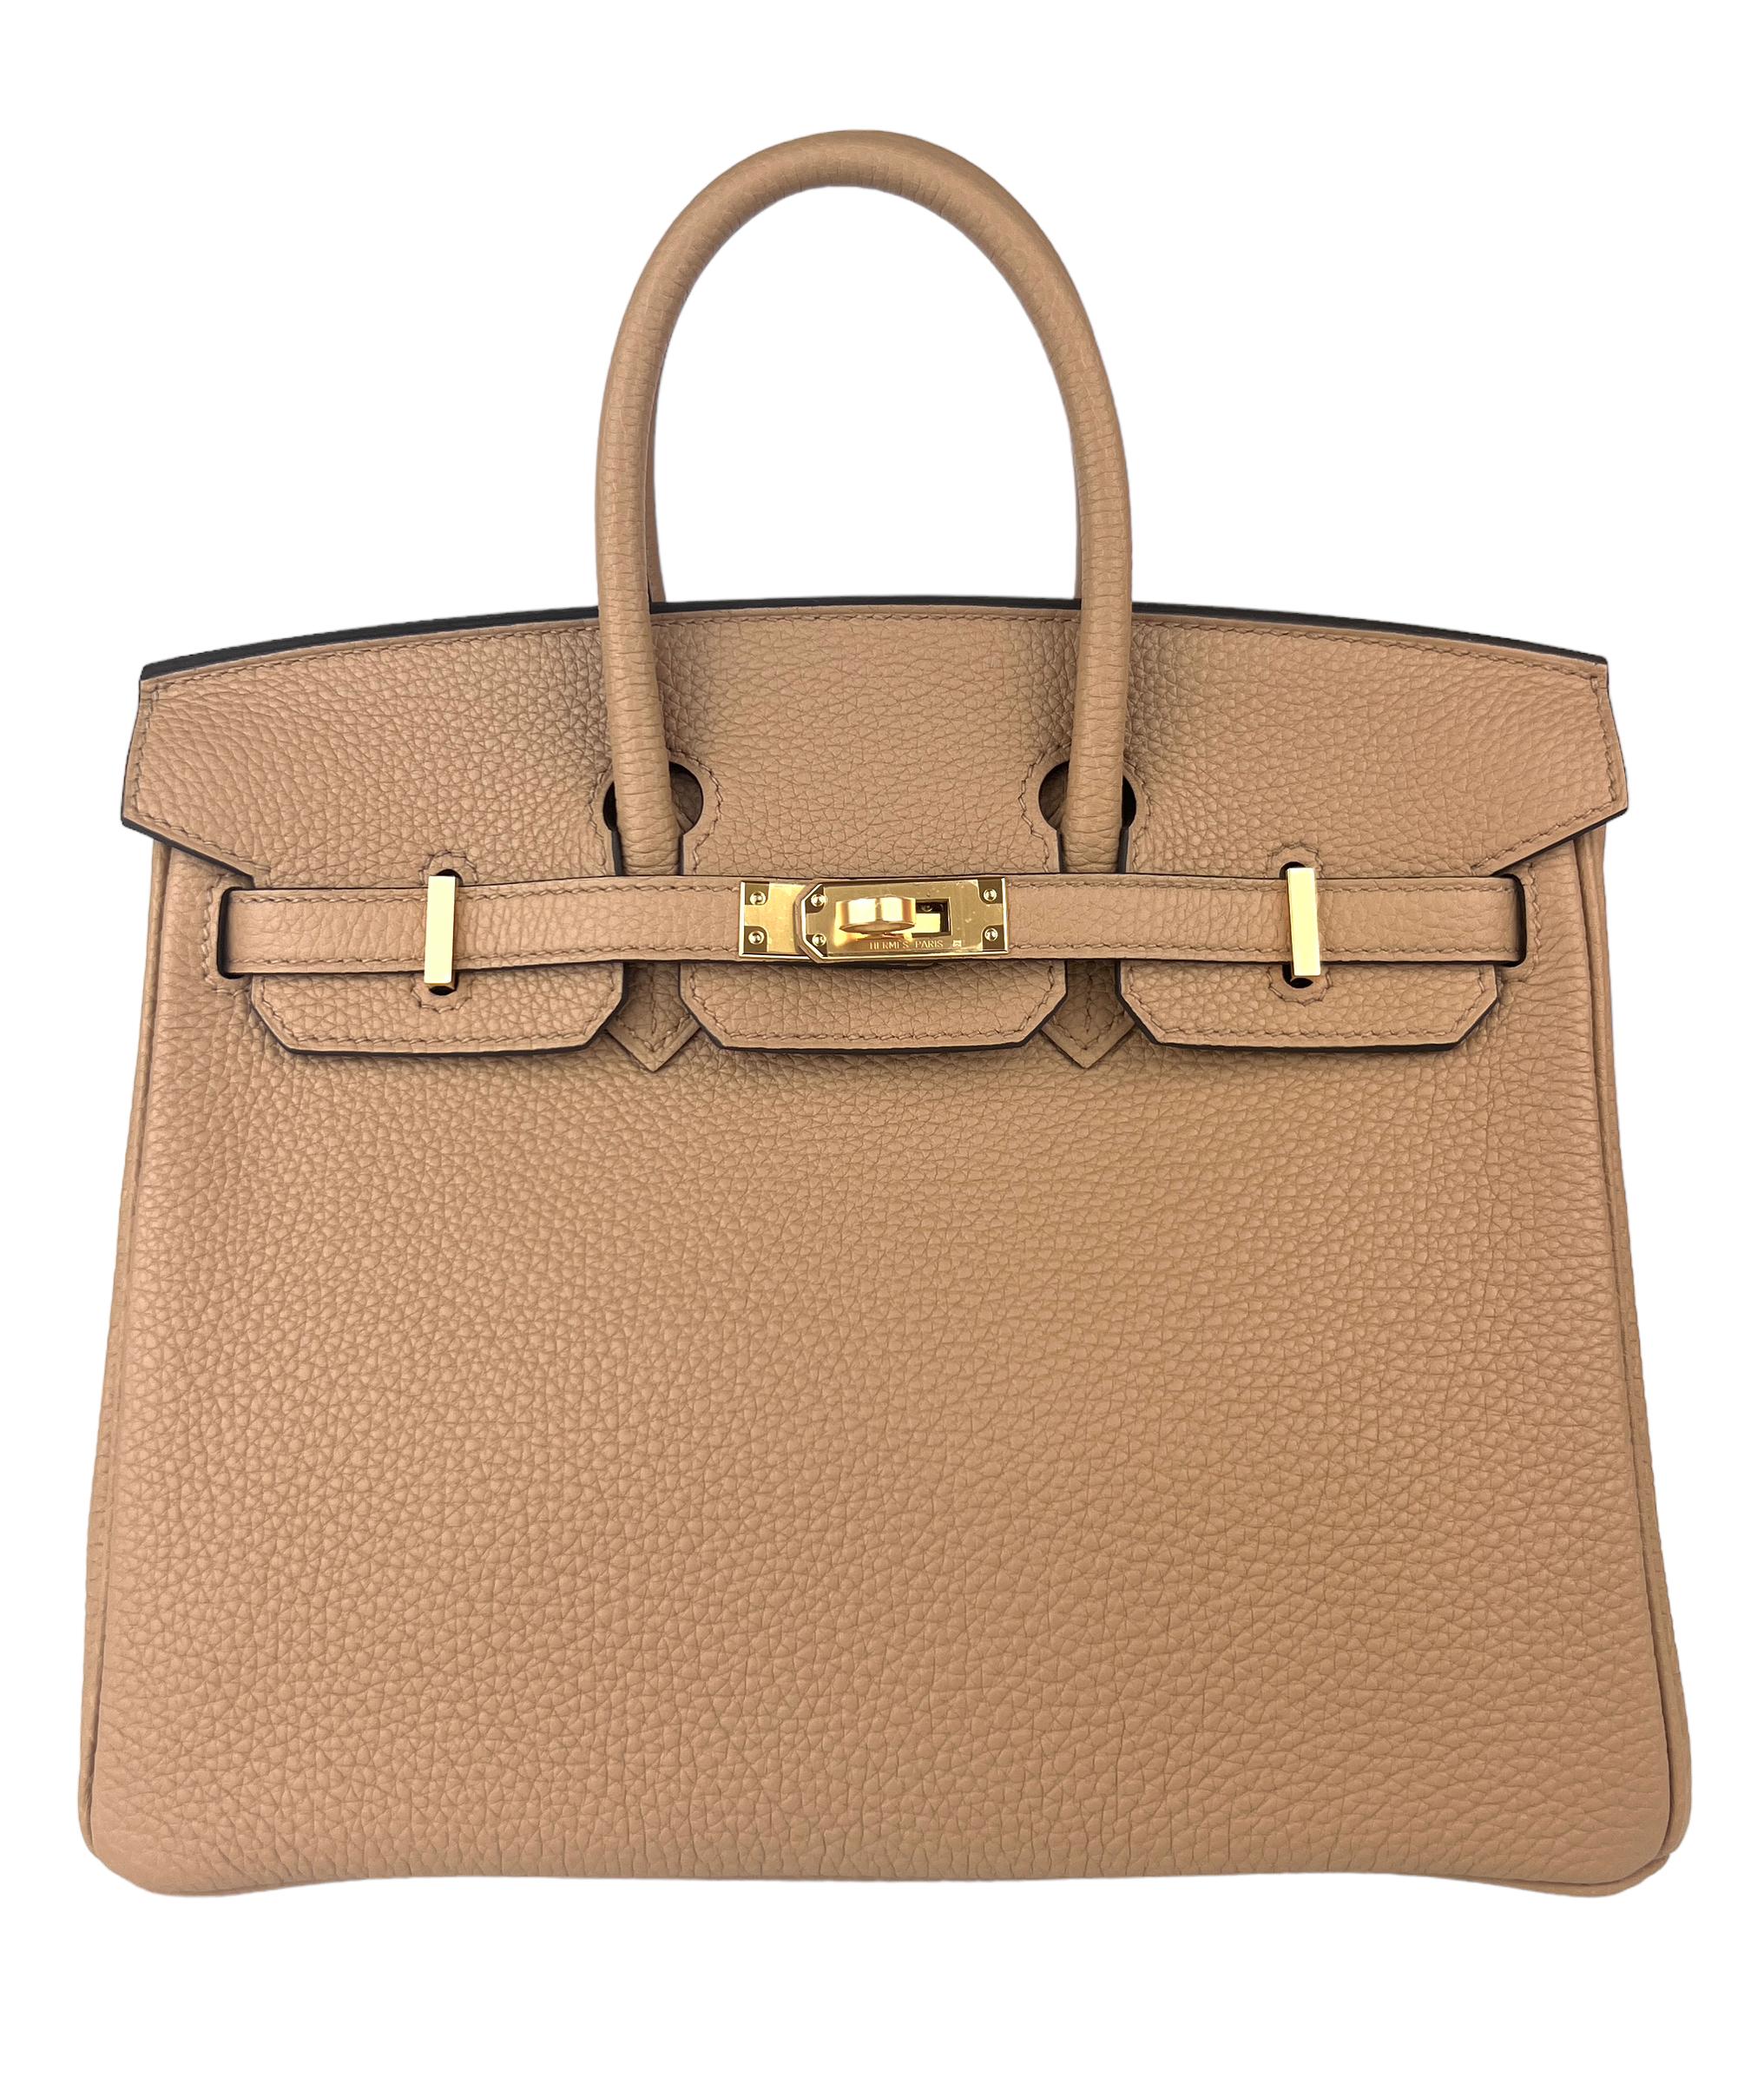 Absolutely Stunning and One The Most Coveted and Difficult to get Hermes Combos! New 2022 Hermes Birkin 25 Chai Togo Leather complimented by Gold Hardware. U Stamp 2022. One of the most coveted hardest combinations to get! Includes all accessories